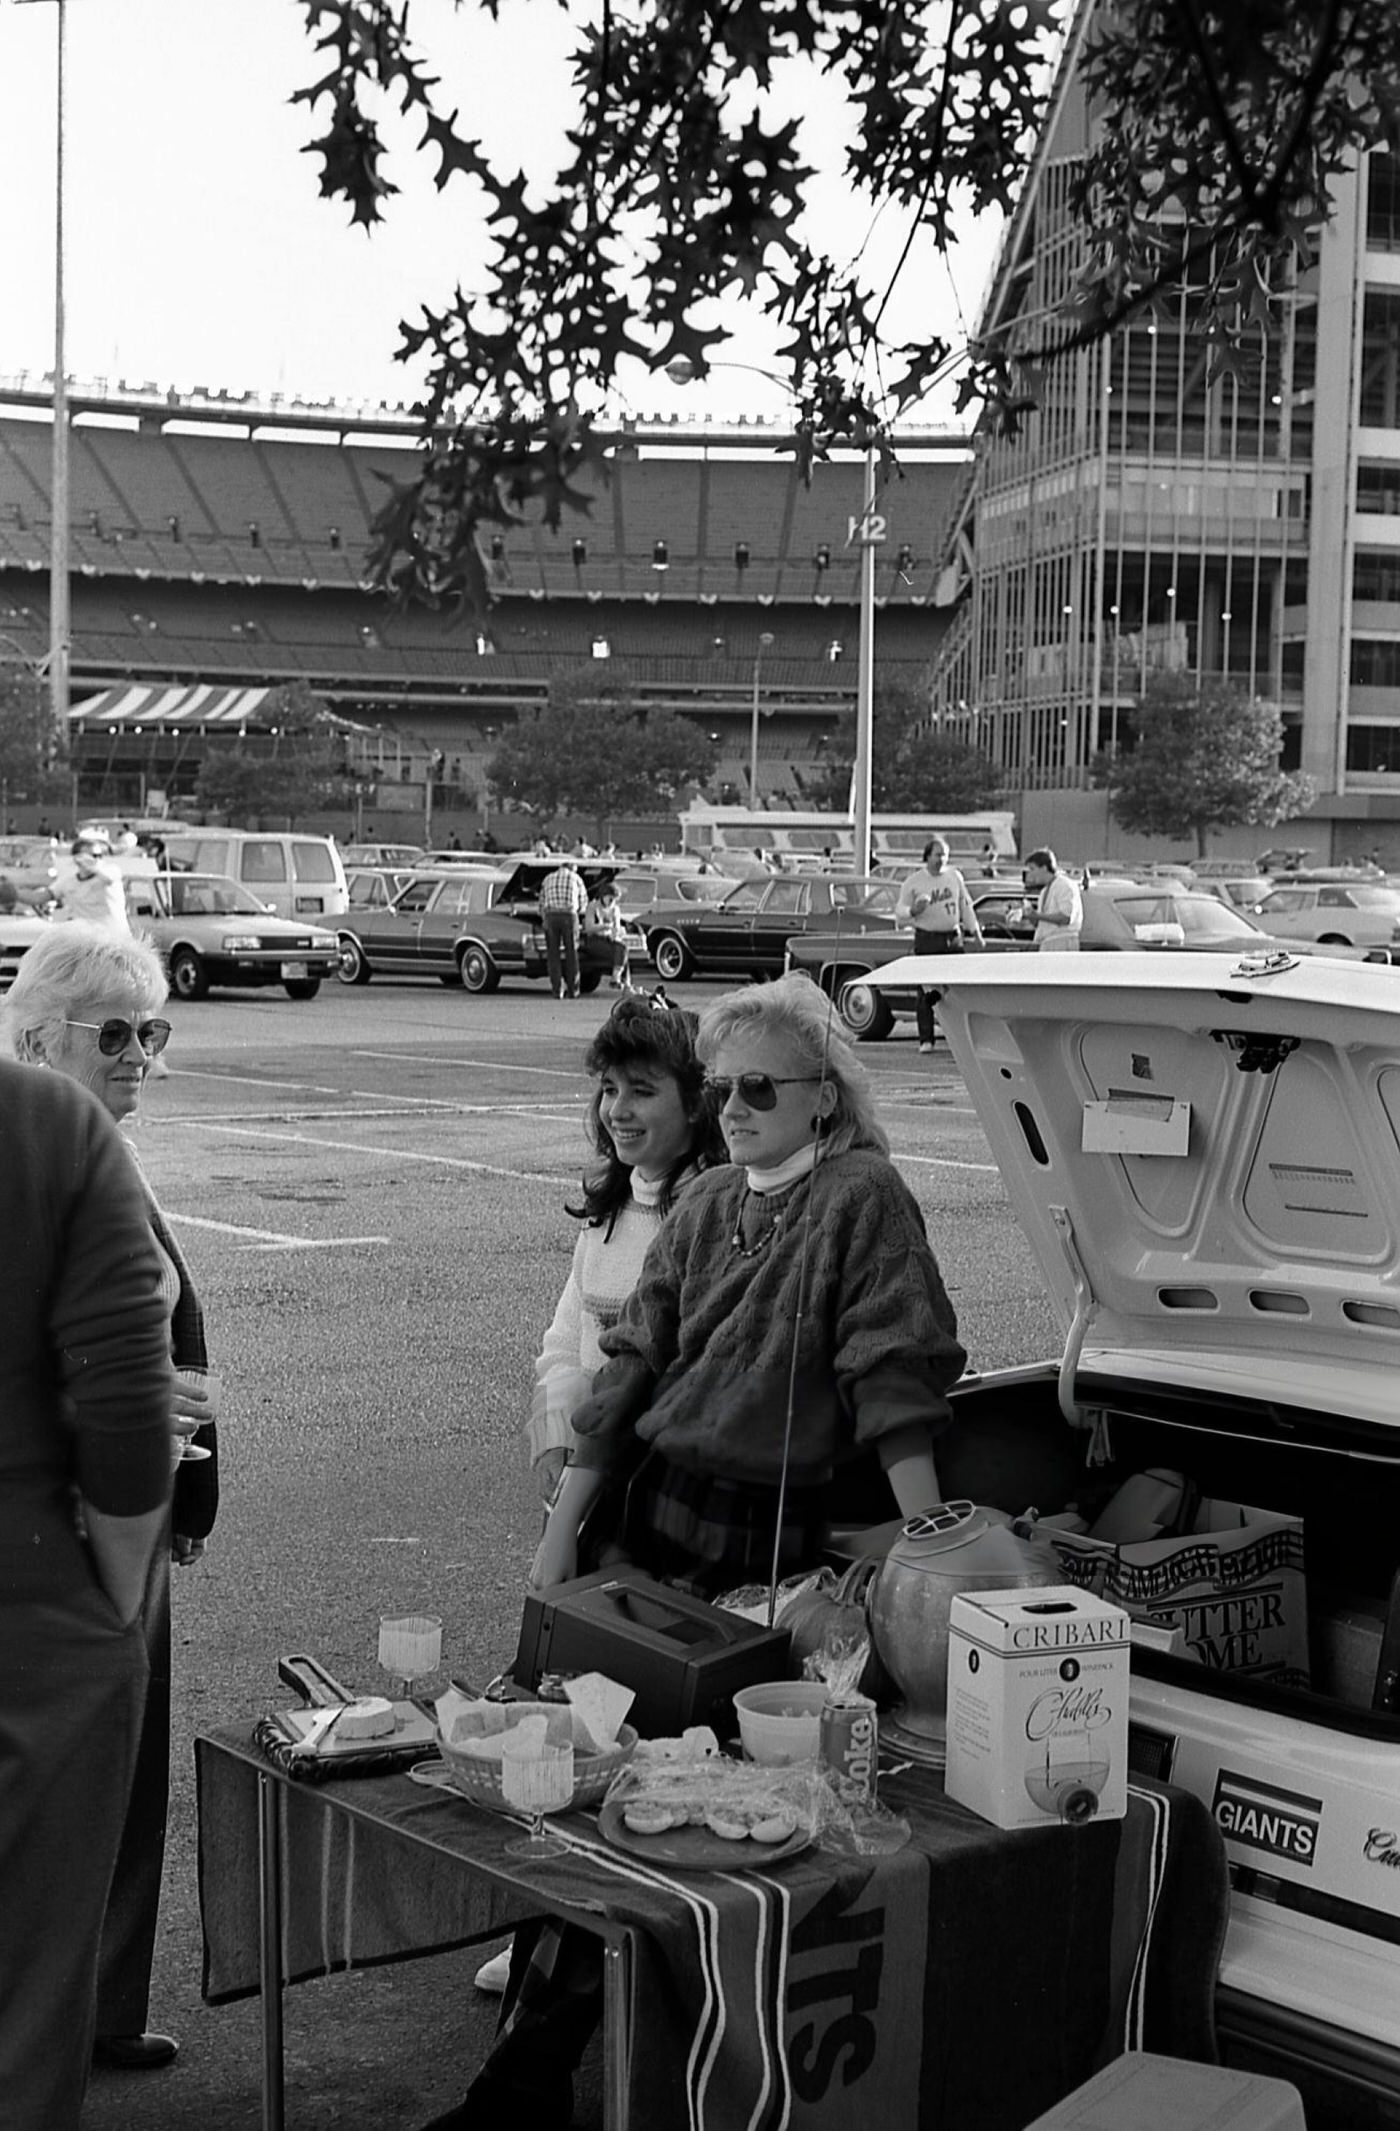 A Group Of Baseball Fans Tailgate In A Parking Lot Outside Shea Stadium Before Game Six Of The 1986 World Series, Corona, Queens, 1986.